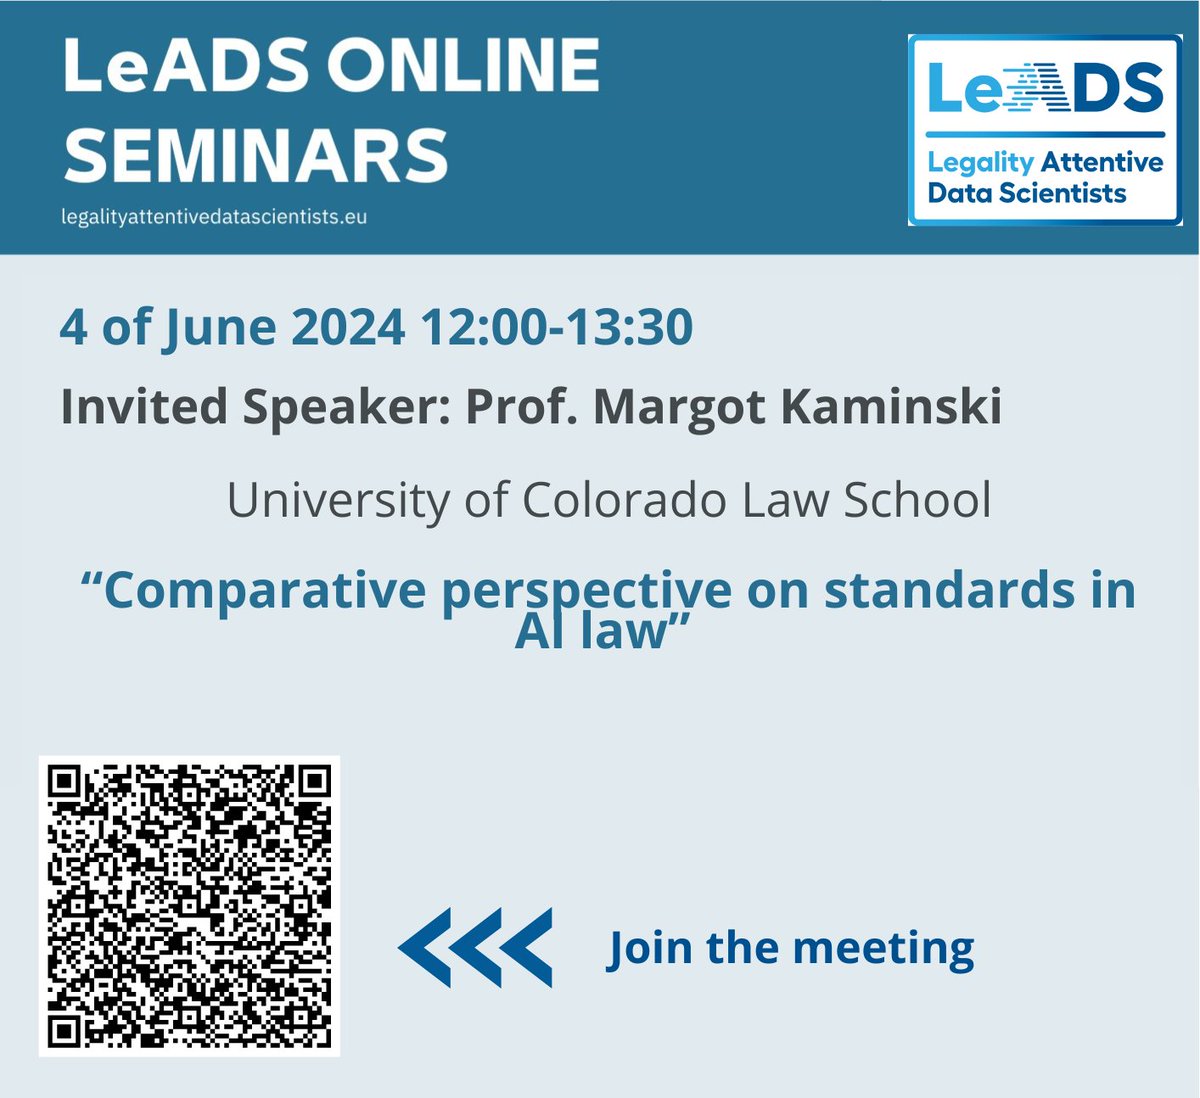 📌LeADS invites you to attend the online seminar featuring Prof. Margot Kaminski @MargotKaminski on the topic of 'Comparative perspective on standards in AI law,' to be held on the 4th of June from 12-13:30!